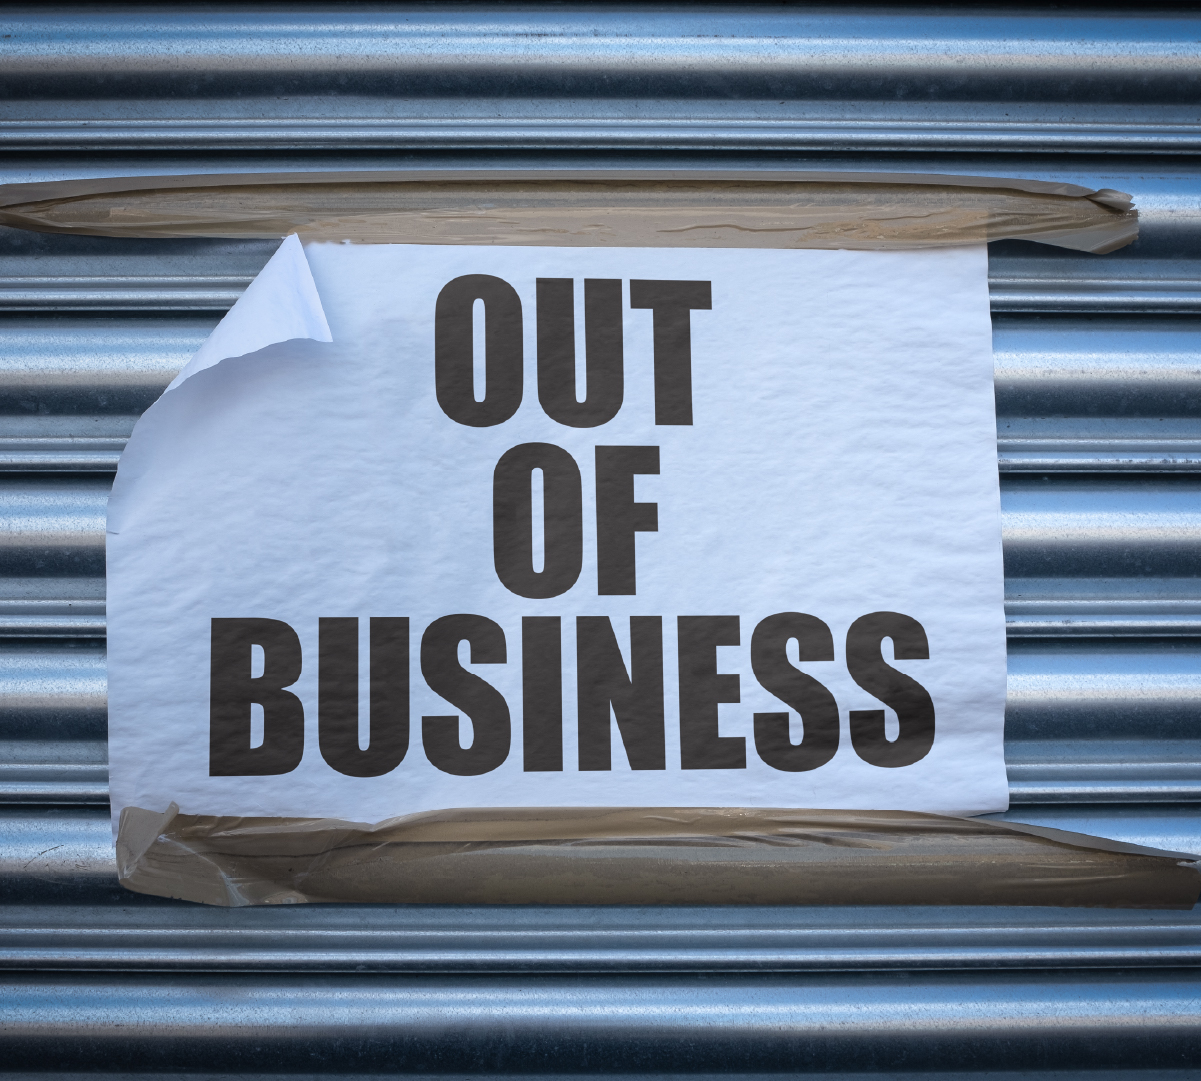 An ‘out of business’ sign on a shutter.